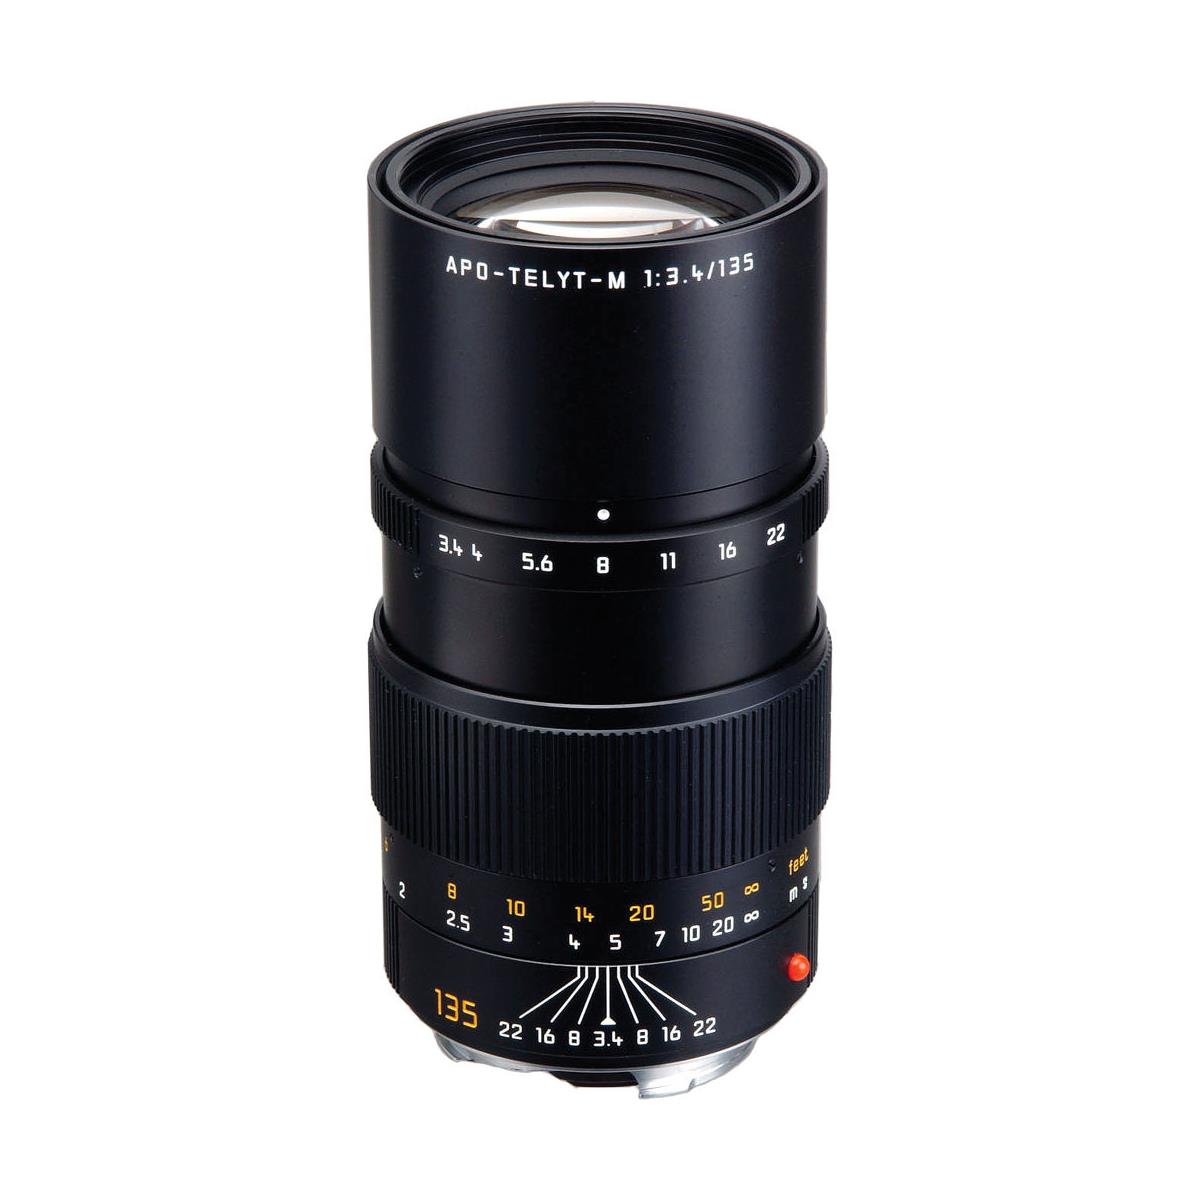 Image of Leica 135mm f/3.4 APO-Telyt-M Lens for M System